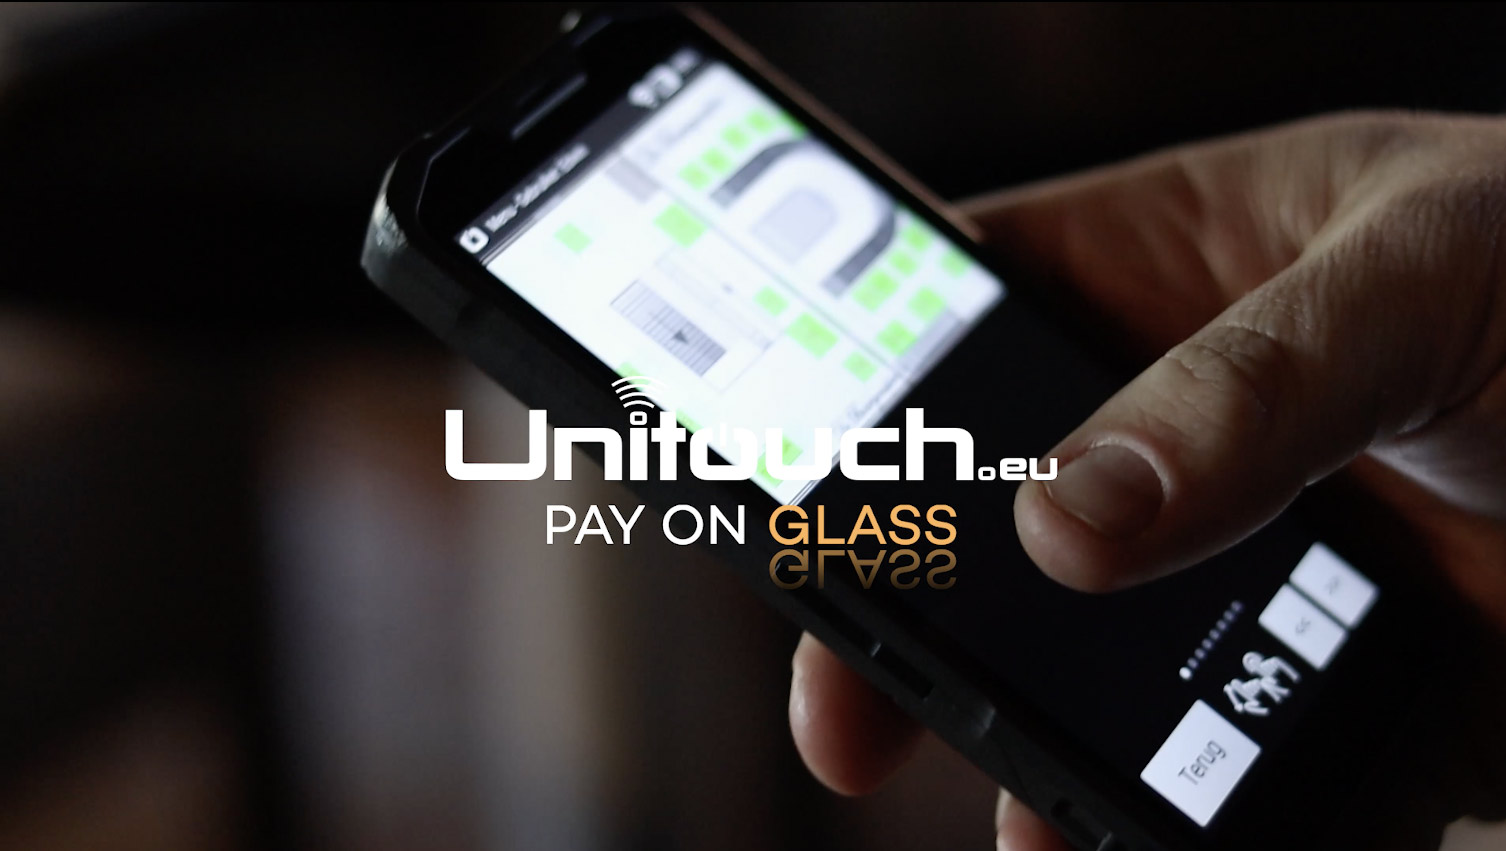 Unitouch Pay on Glass